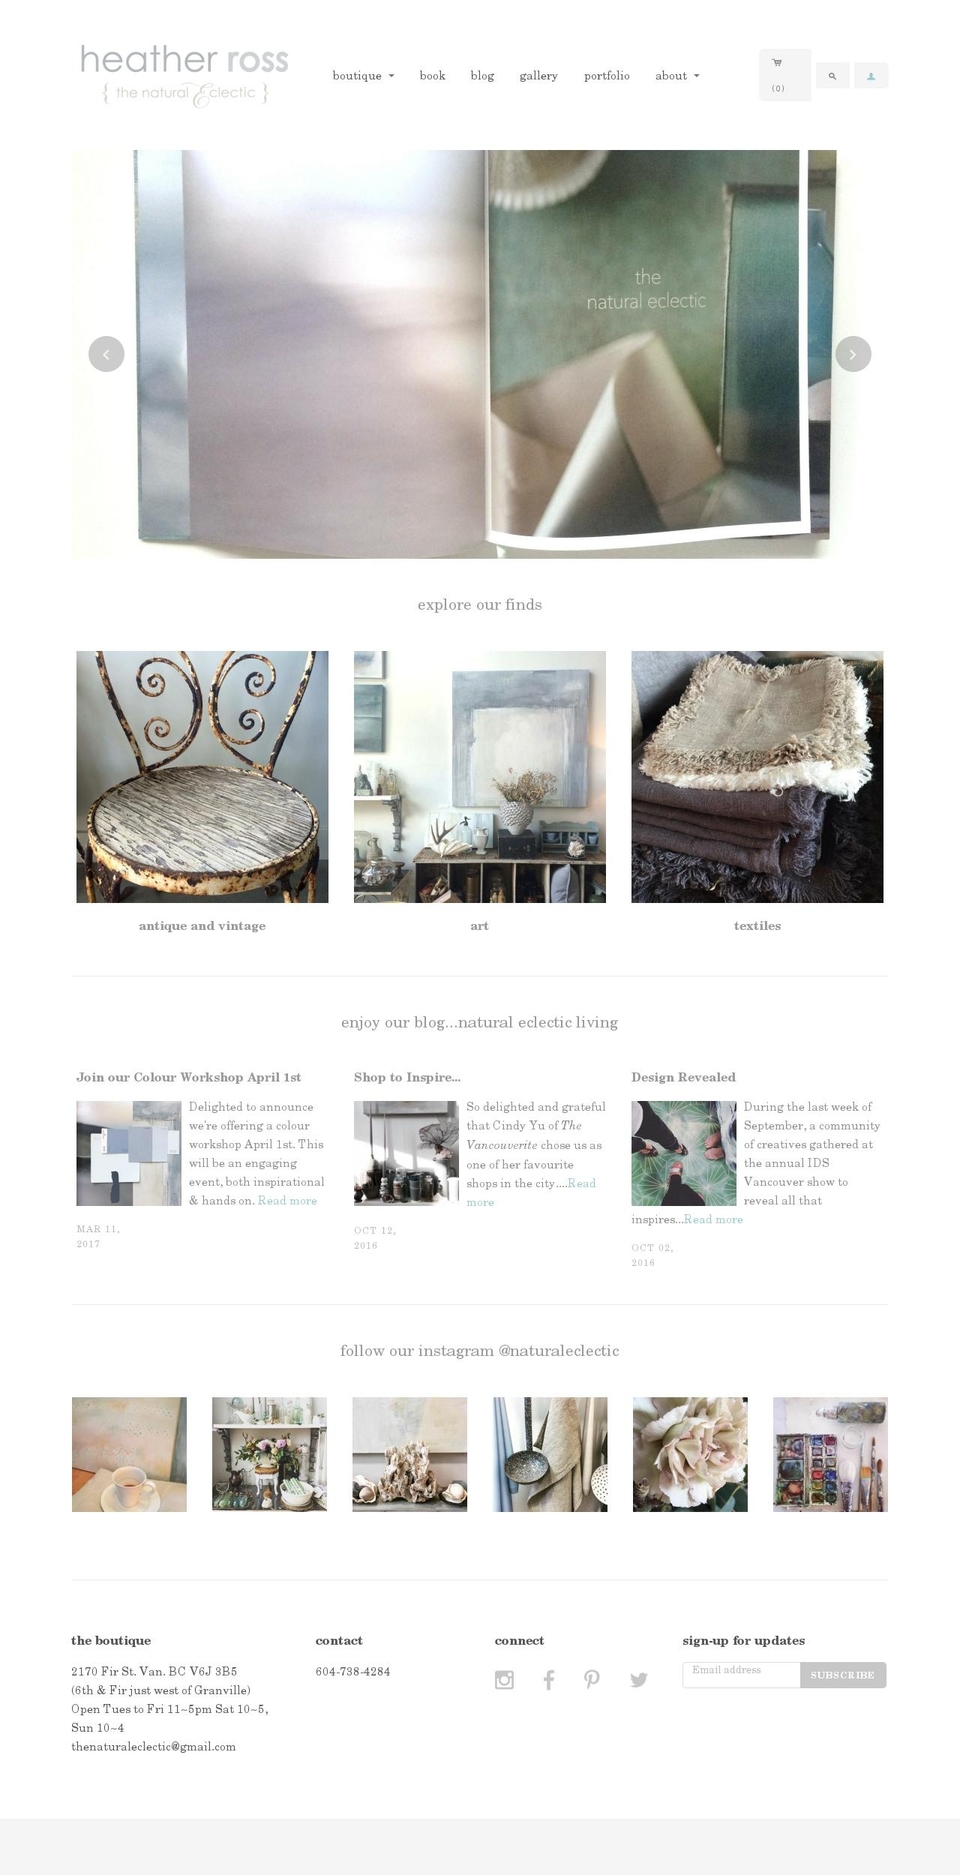 Cypress Shopify theme site example heatherrossnaturaleclectic.com